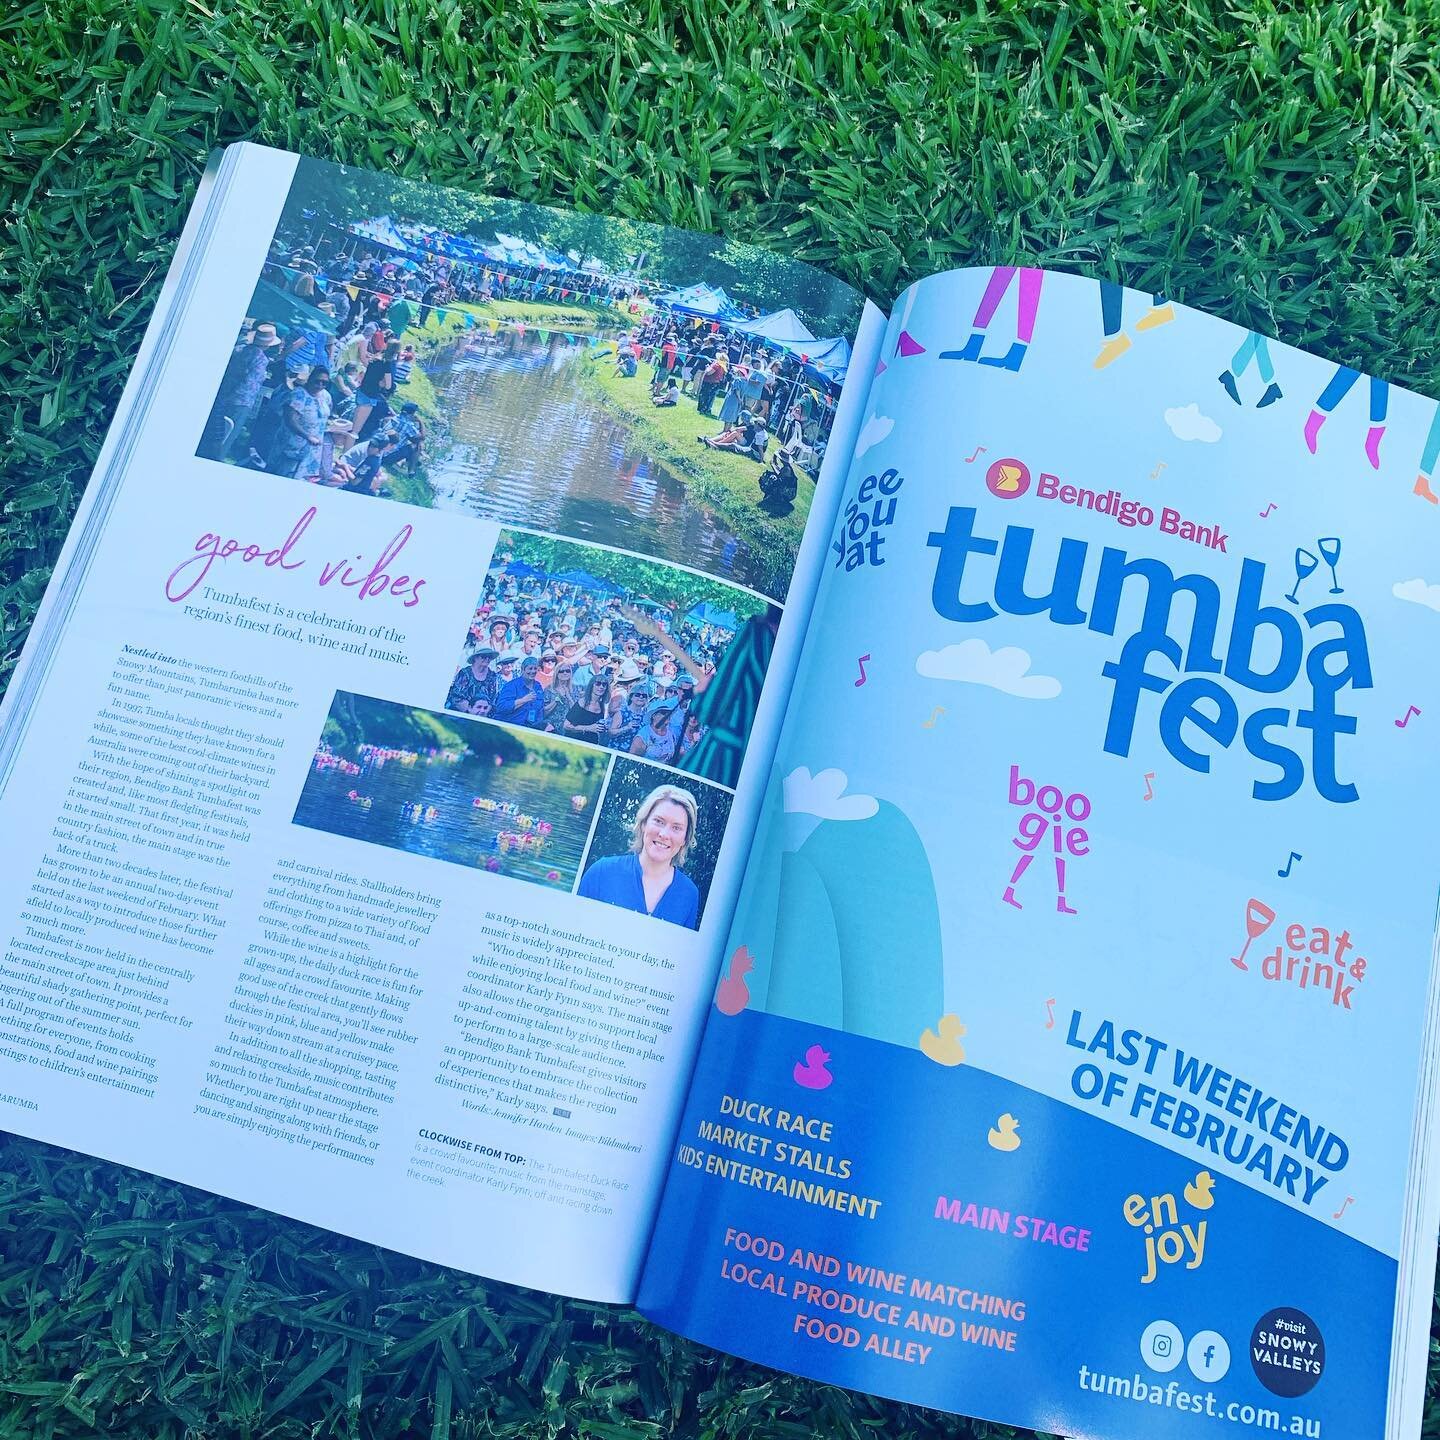 So great seeing the @visitsnowyvalleys feature in the @regionallifestylemagazine Summer edition (and the coverage of the @bendigobankofficial @tumbafest ) have you got your copy yet?